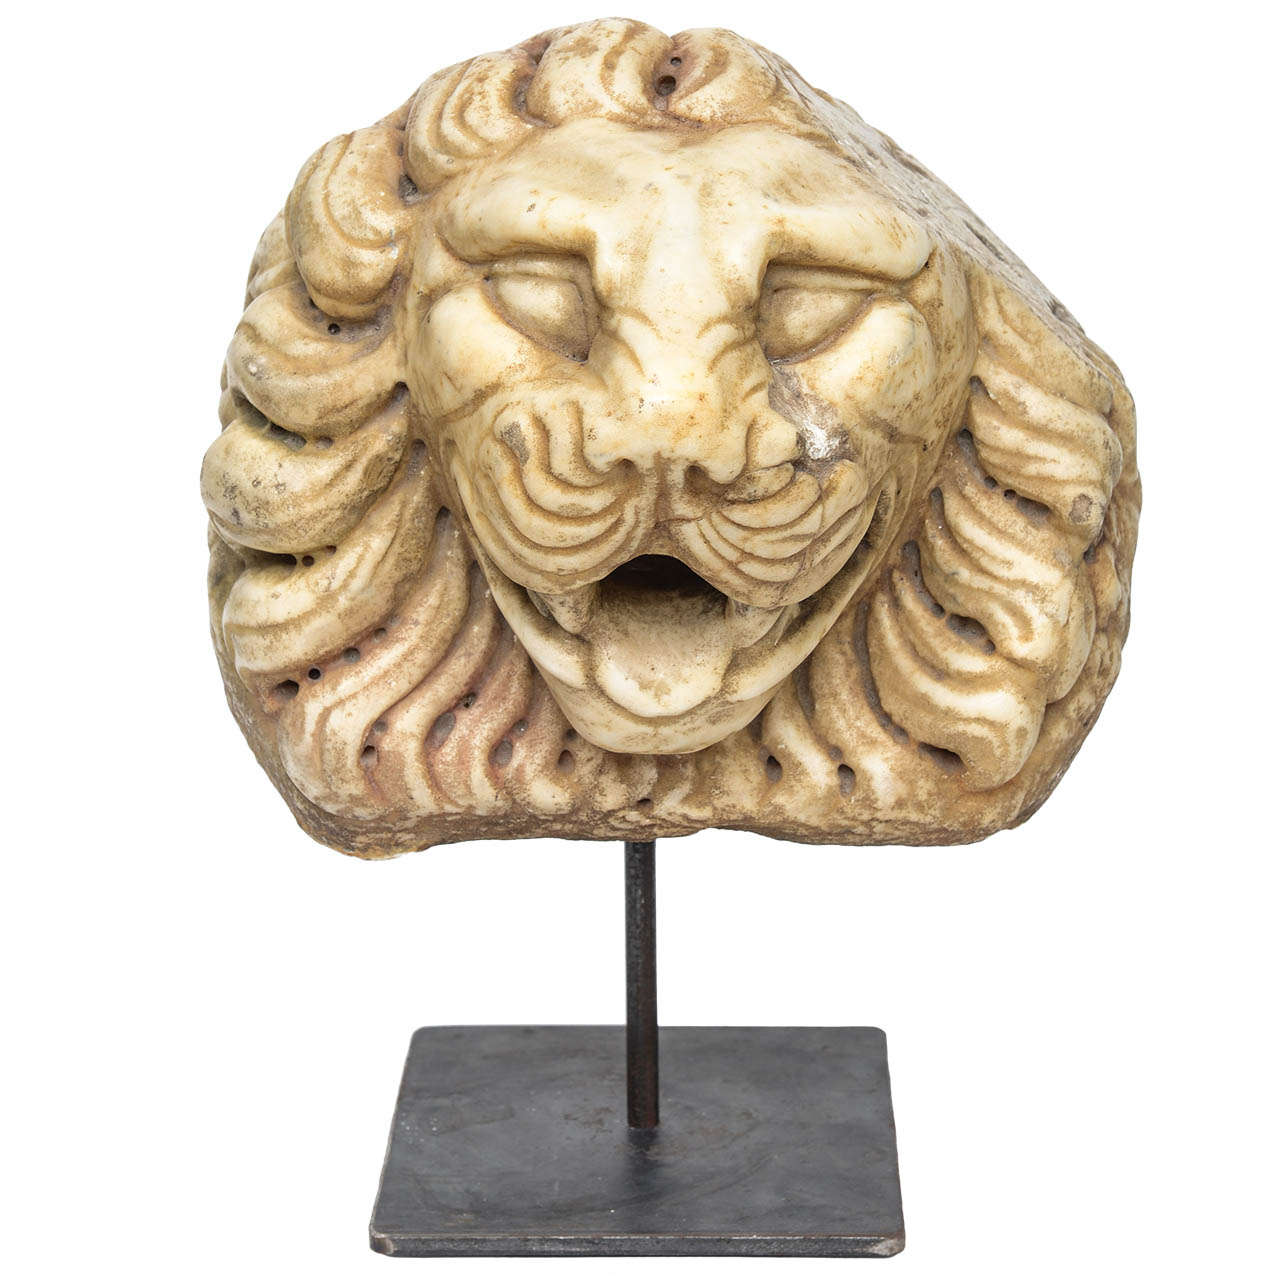 Carved Marble Lion Fountain Spout, 17th Century Italian